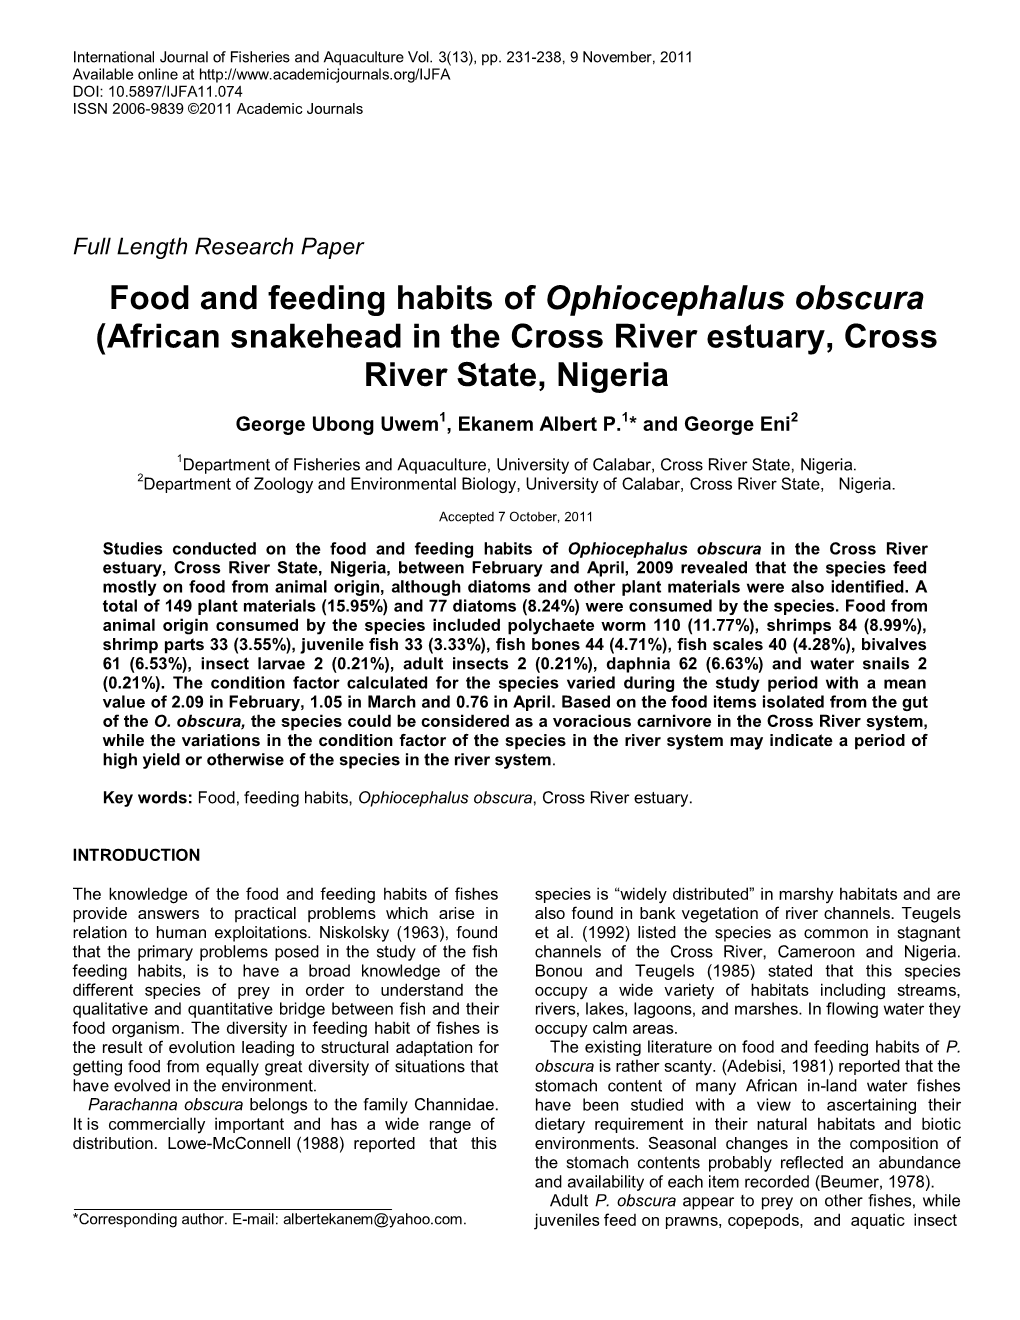 Food and Feeding Habits of Ophiocephalus Obscura (African Snakehead in the Cross River Estuary, Cross River State, Nigeria